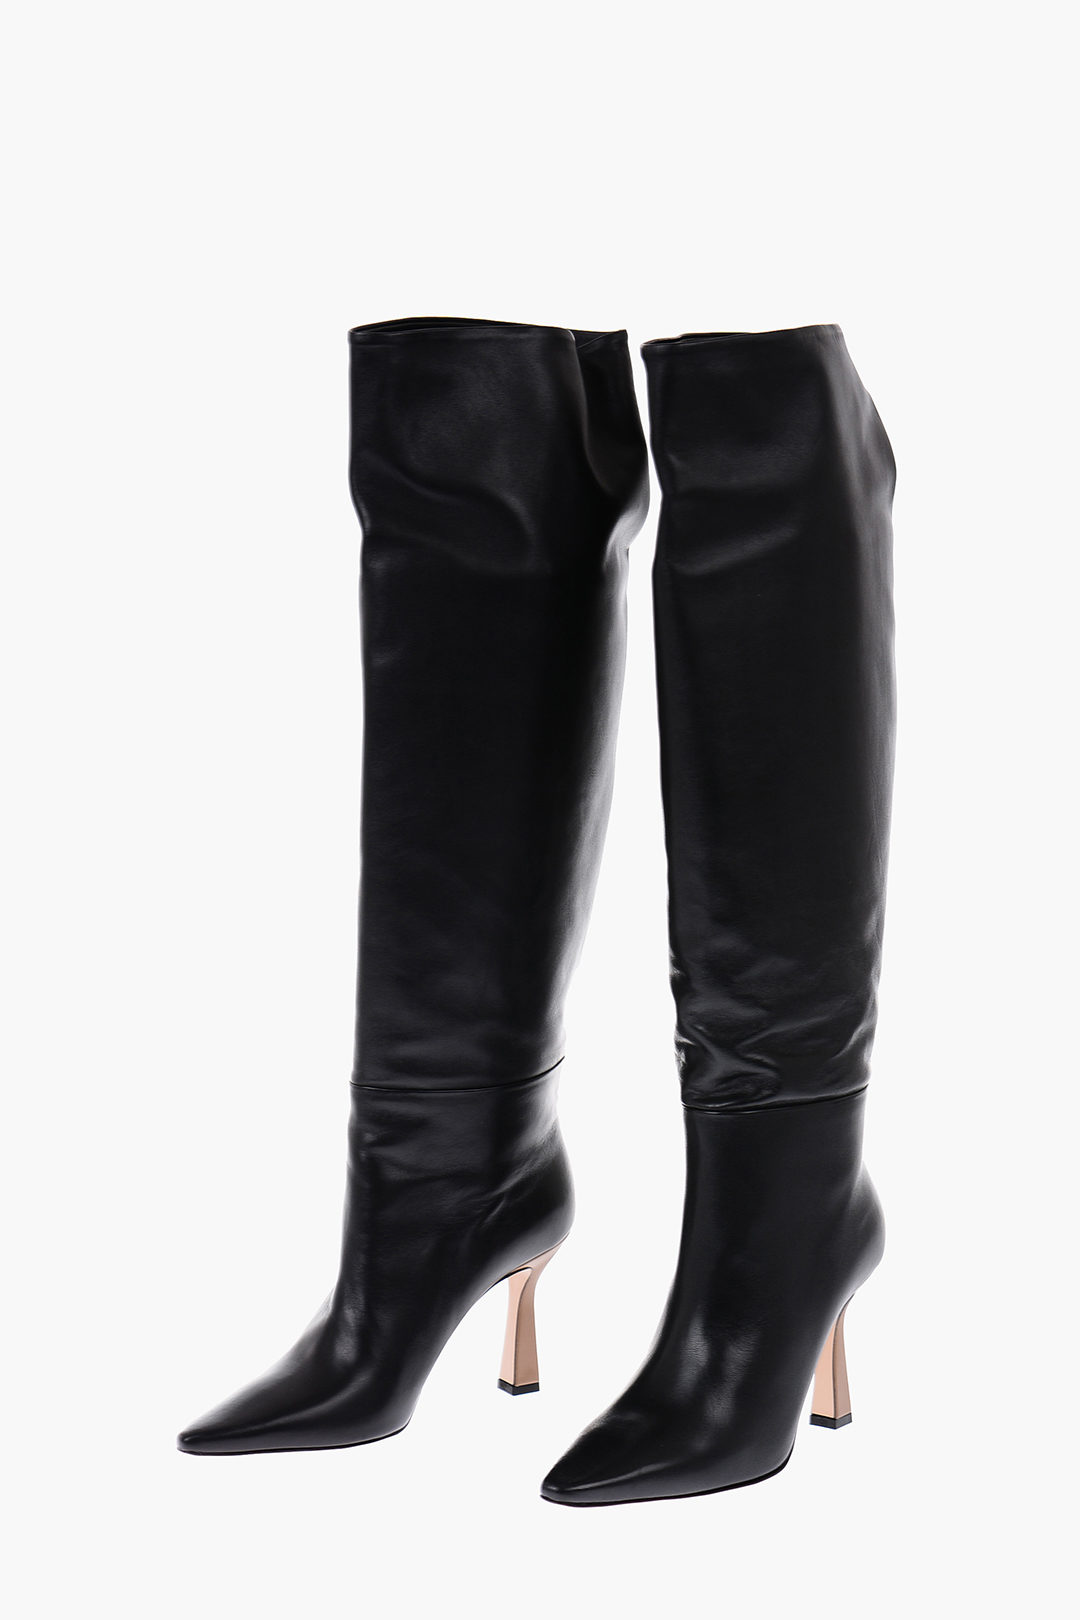 Wandler 10cm leather LINA Knee boots women - Glamood Outlet